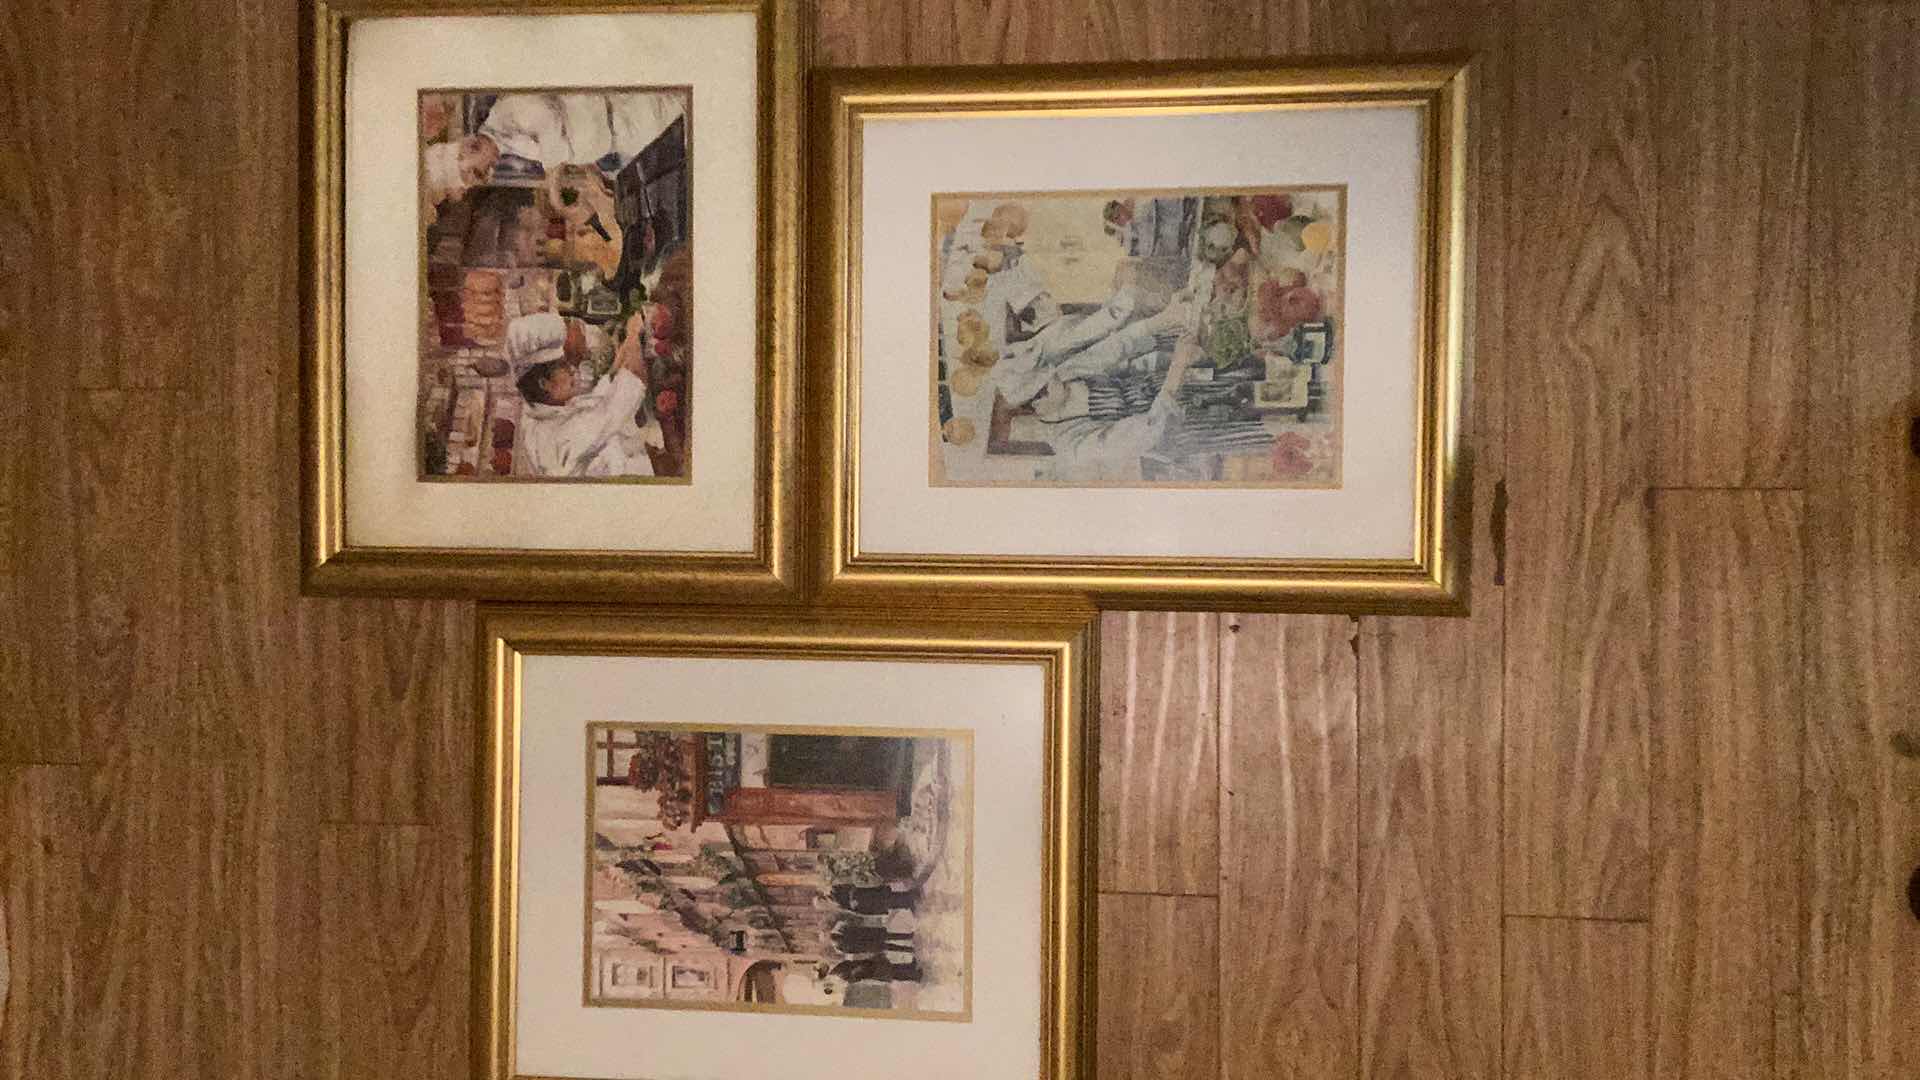 3-FRAMED ART CHEFS AND BISTRO 19” X 23”